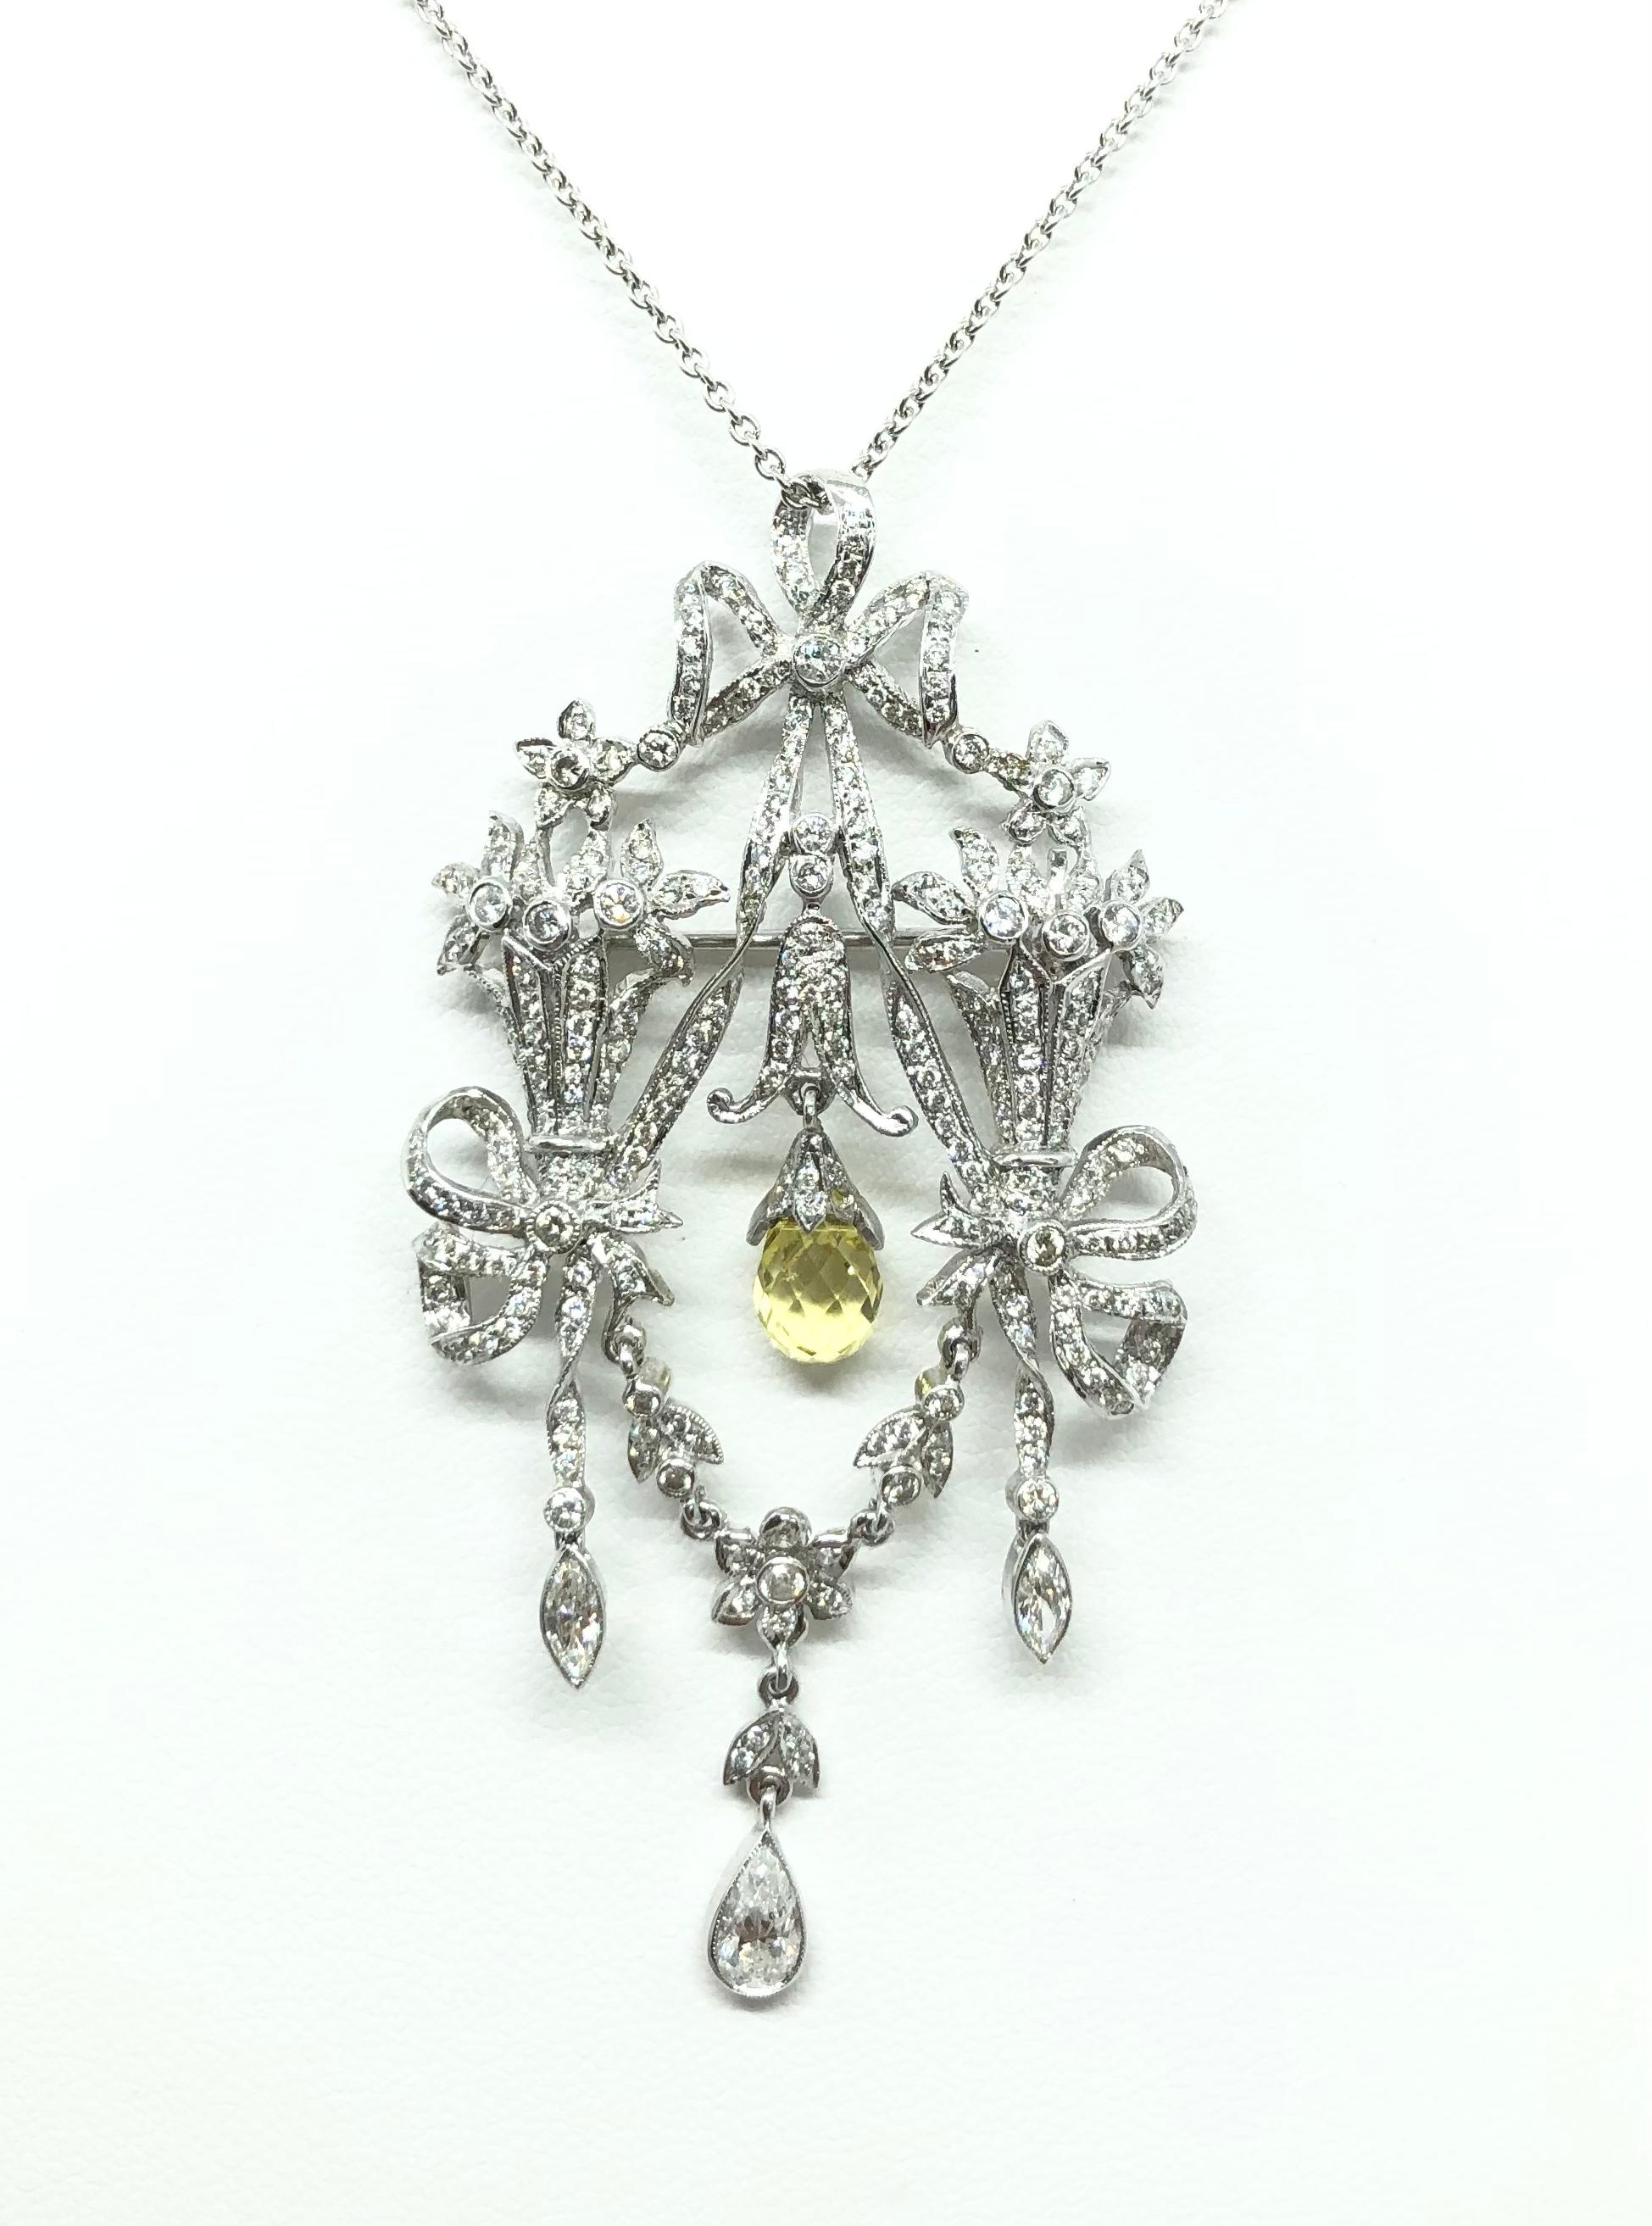 Diamond 1.28 carats with Yellow Sapphire 1.78 carats Brooch/Pendant set in 18 Karat White Gold Settings
(chain not included)

Width: 3.2 cm 
Length: 6.0 cm
Total Weight: 9.59 grams

